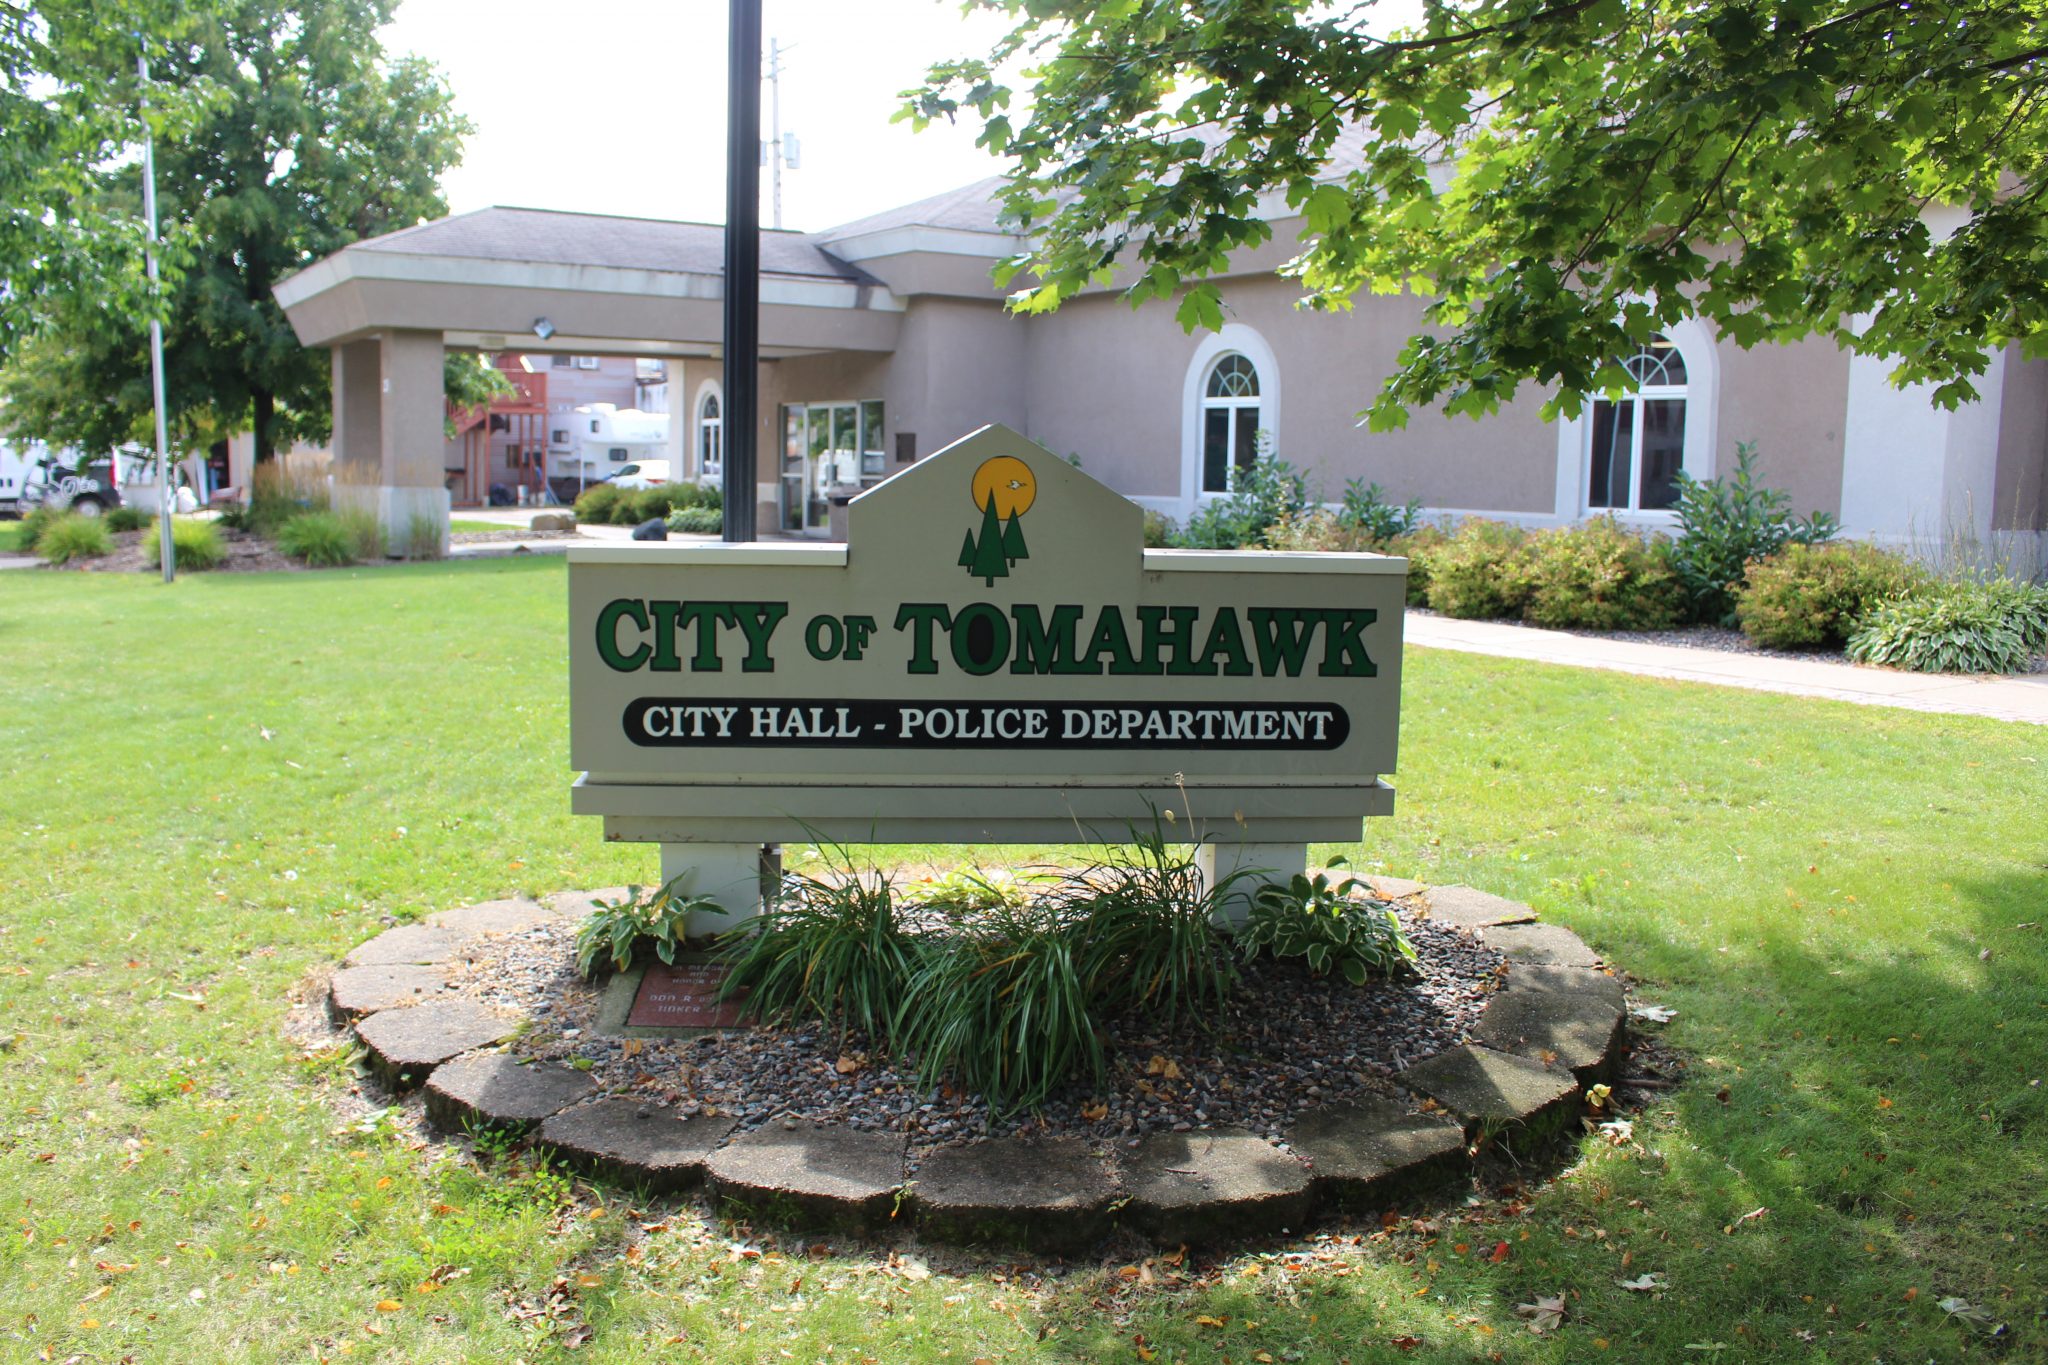 City of Tomahawk officials announce closures in light of COVID-19